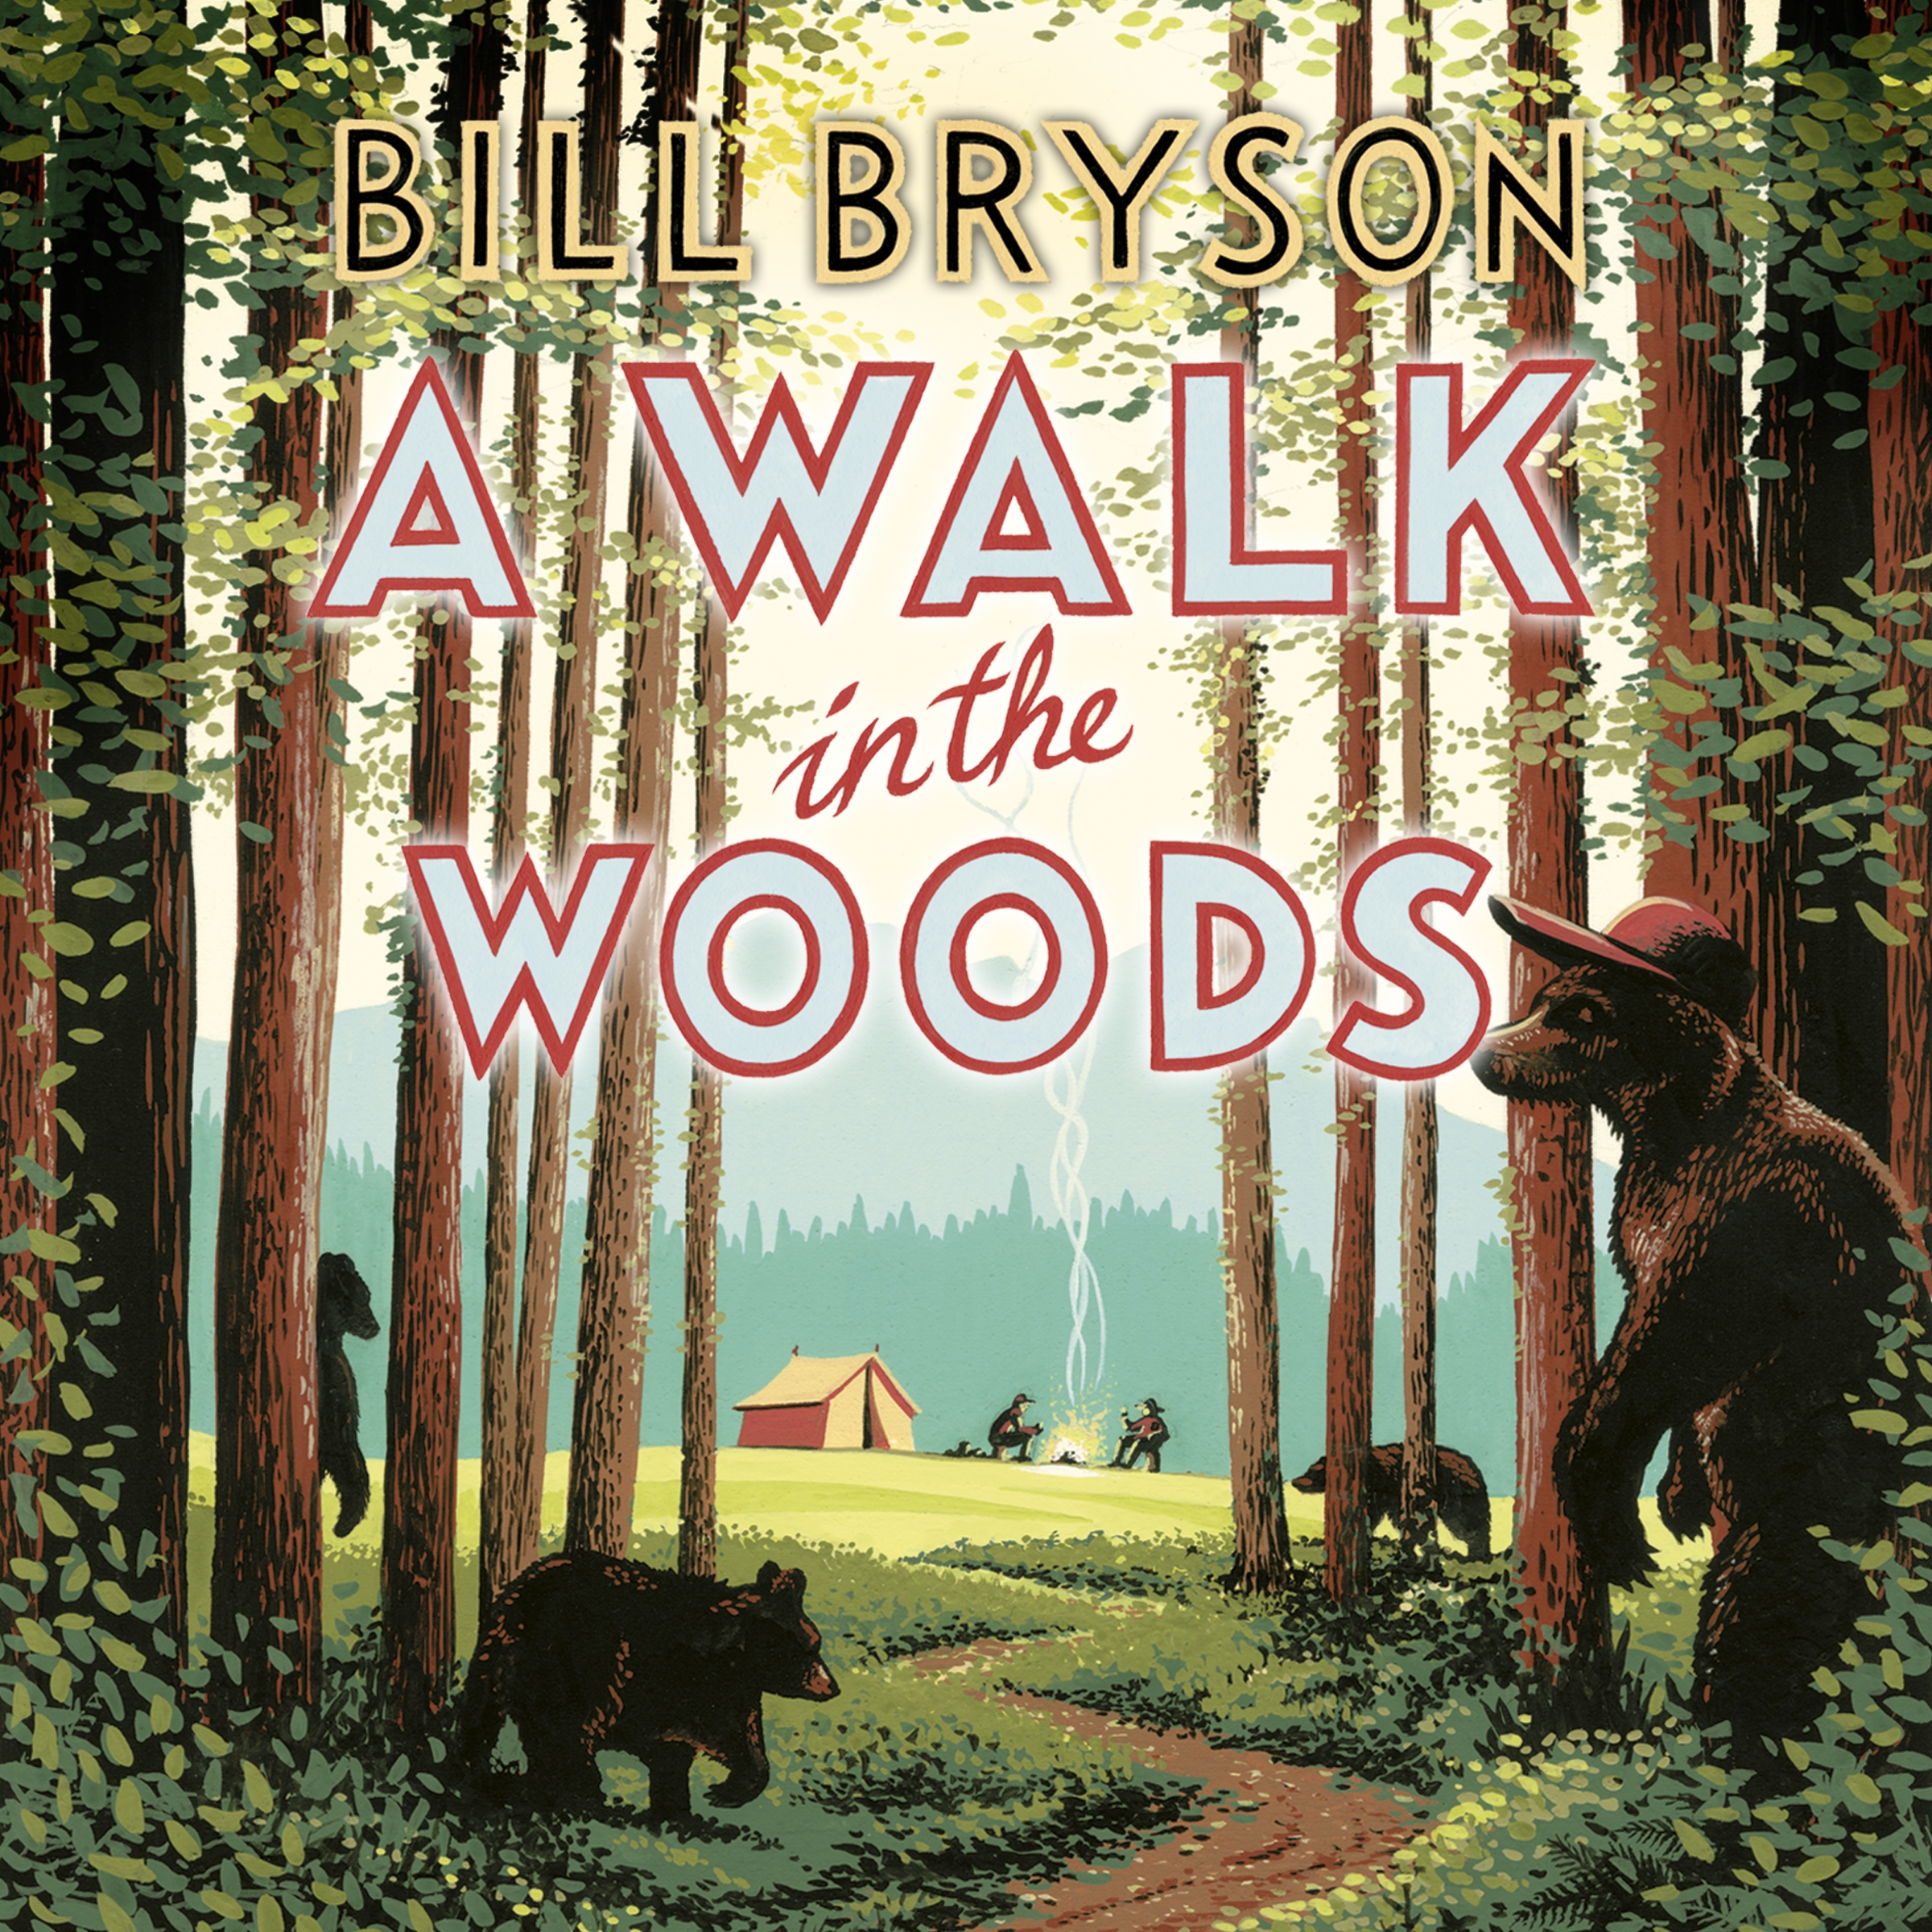 book review a walk in the woods